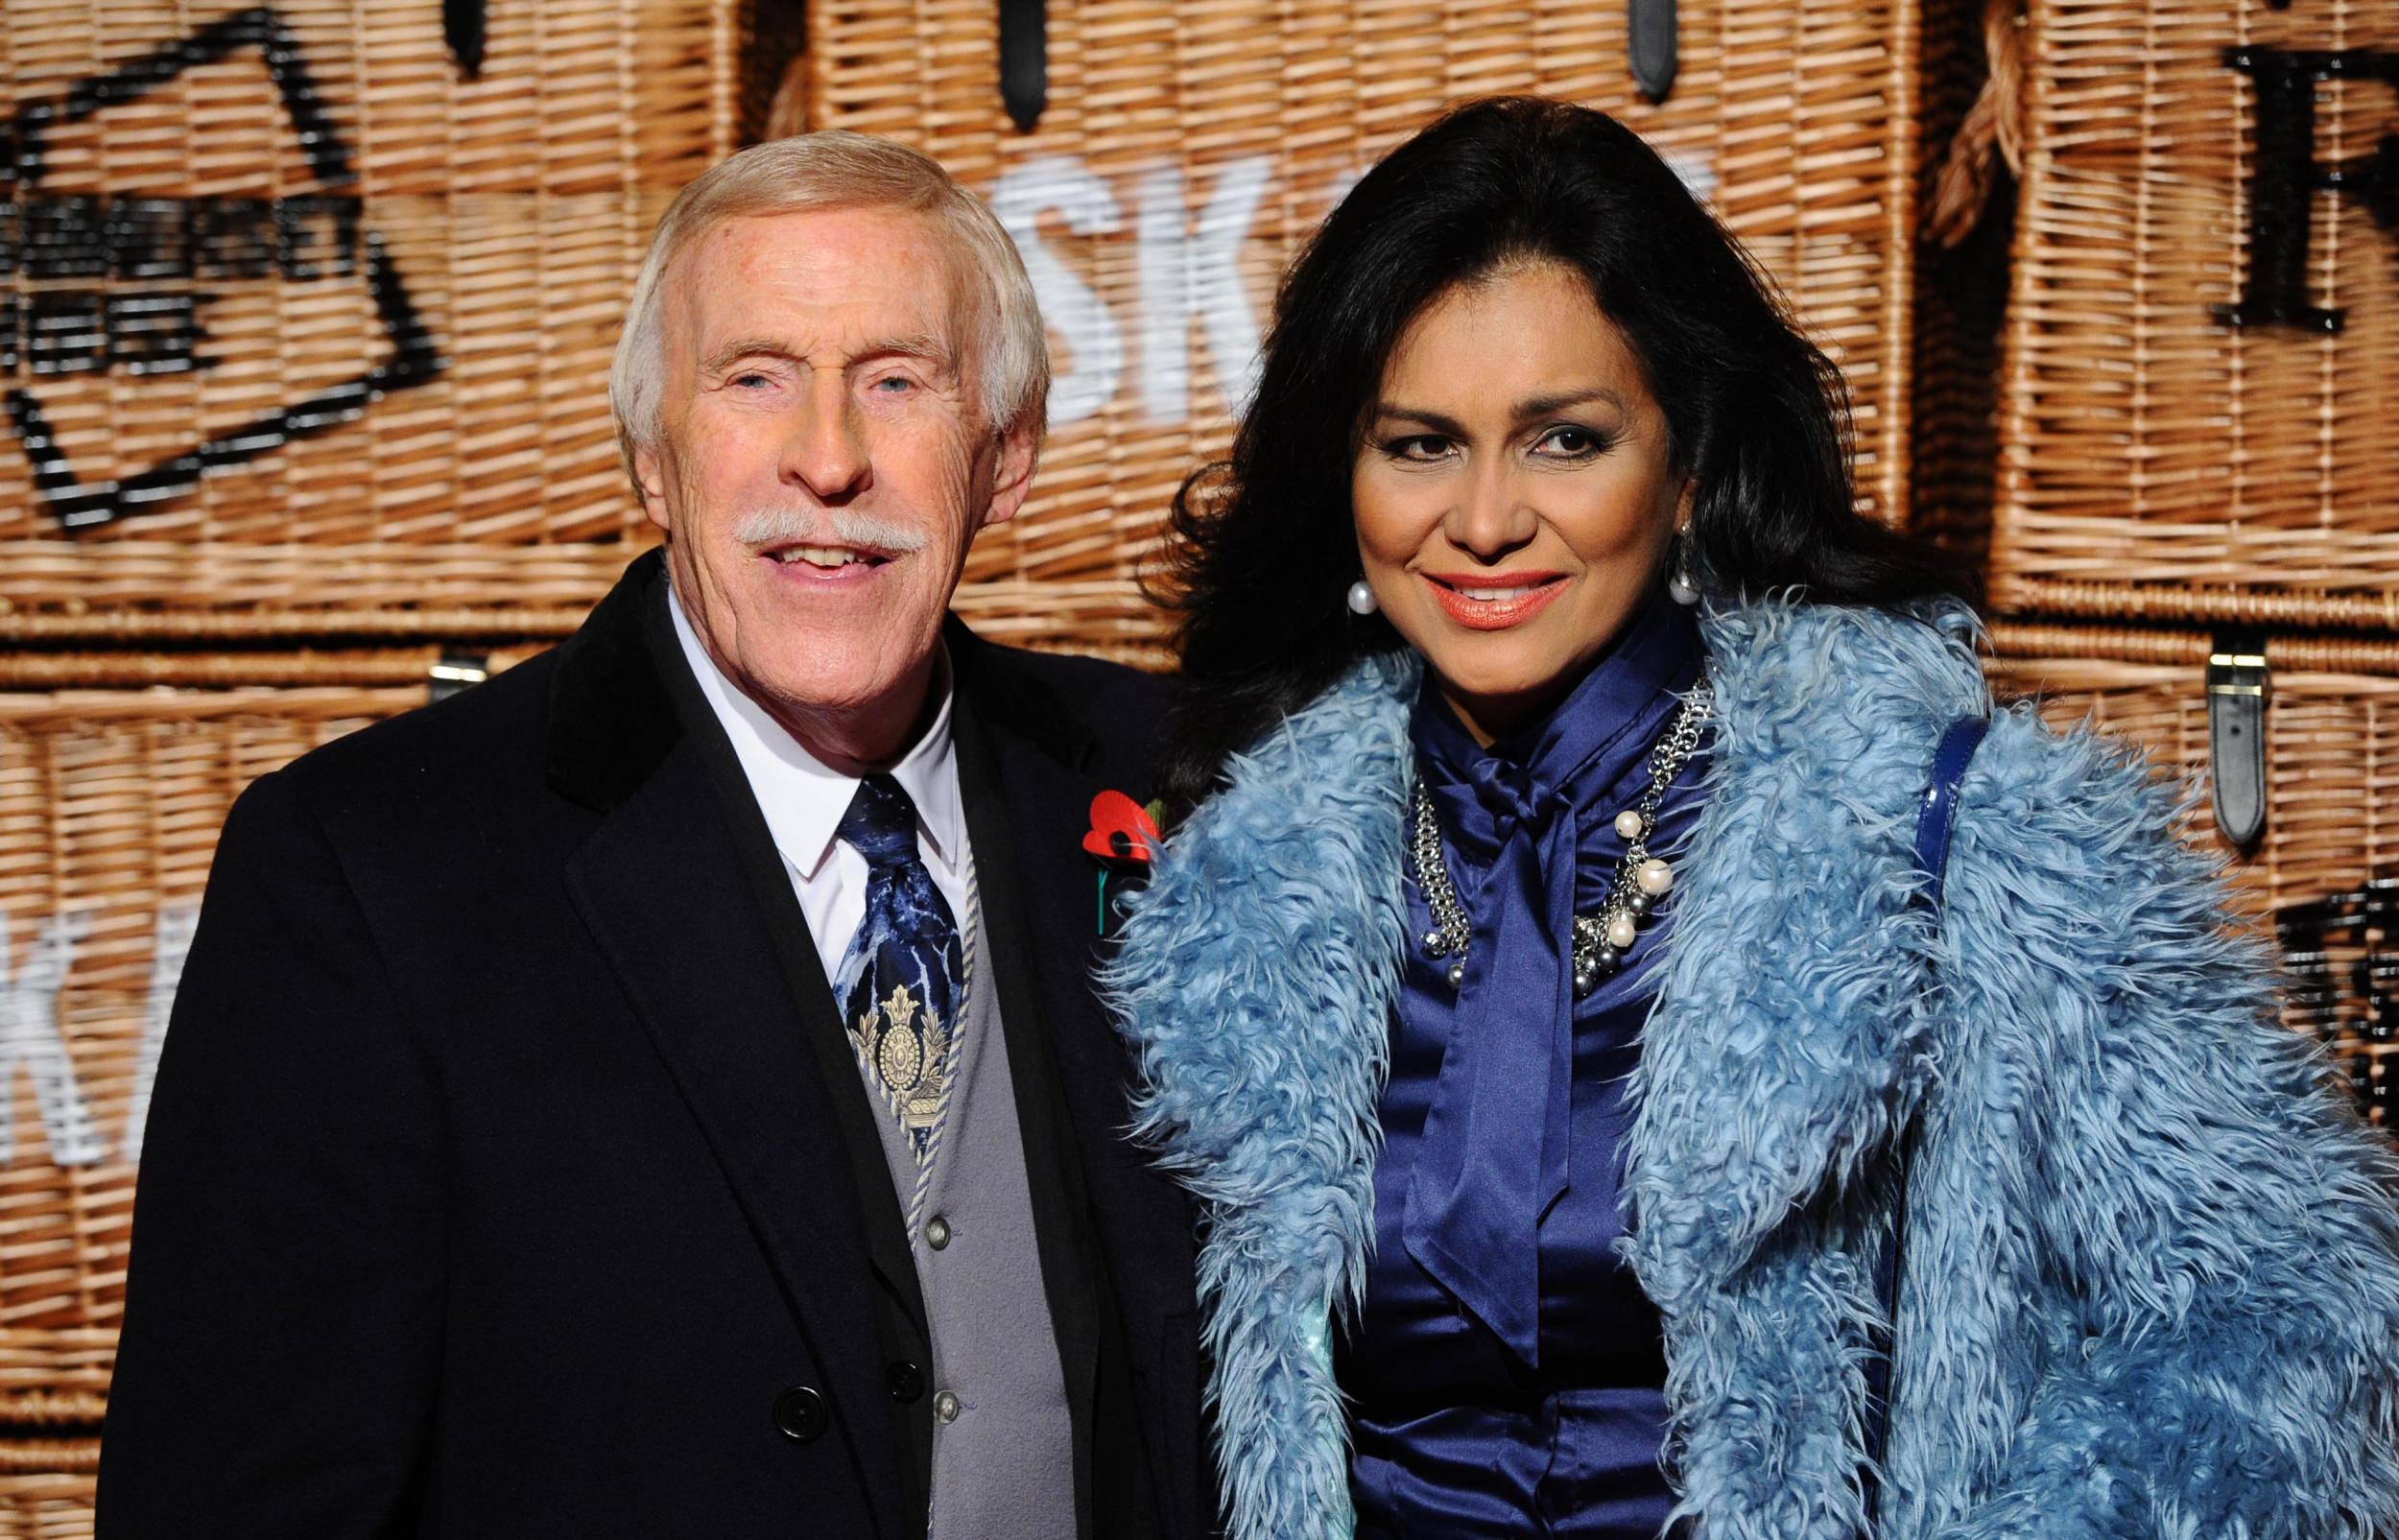 Bruce Forsyth Struggling To Move After Life Saving Surgery According To Wife The Independent